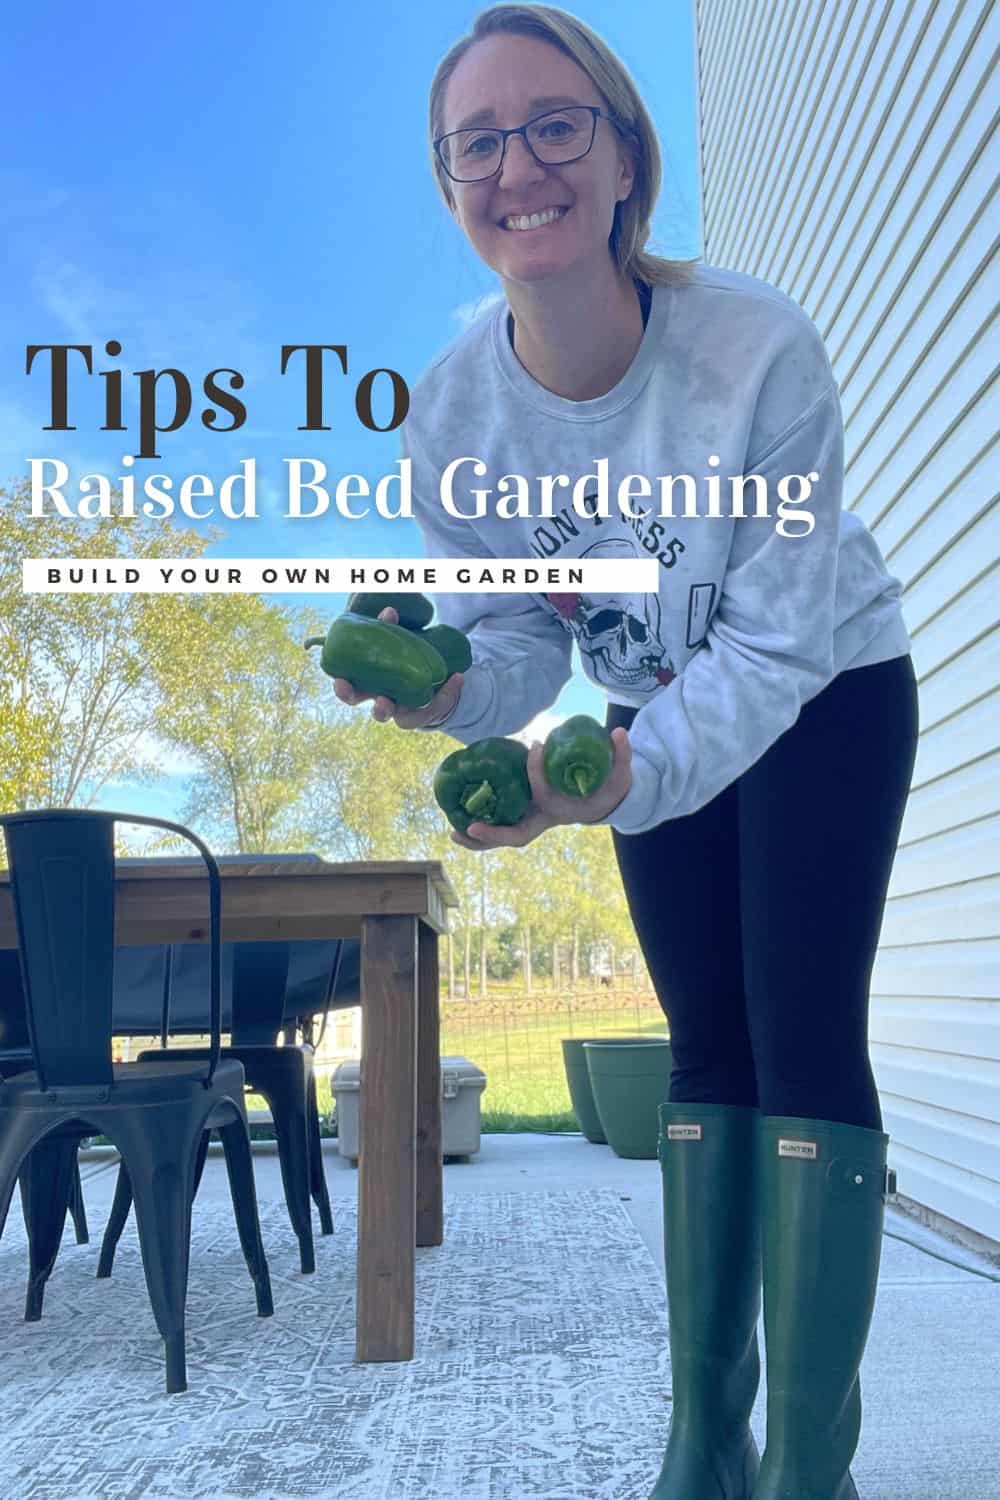 Tips To A Successful Garden: Raised Bed Gardening